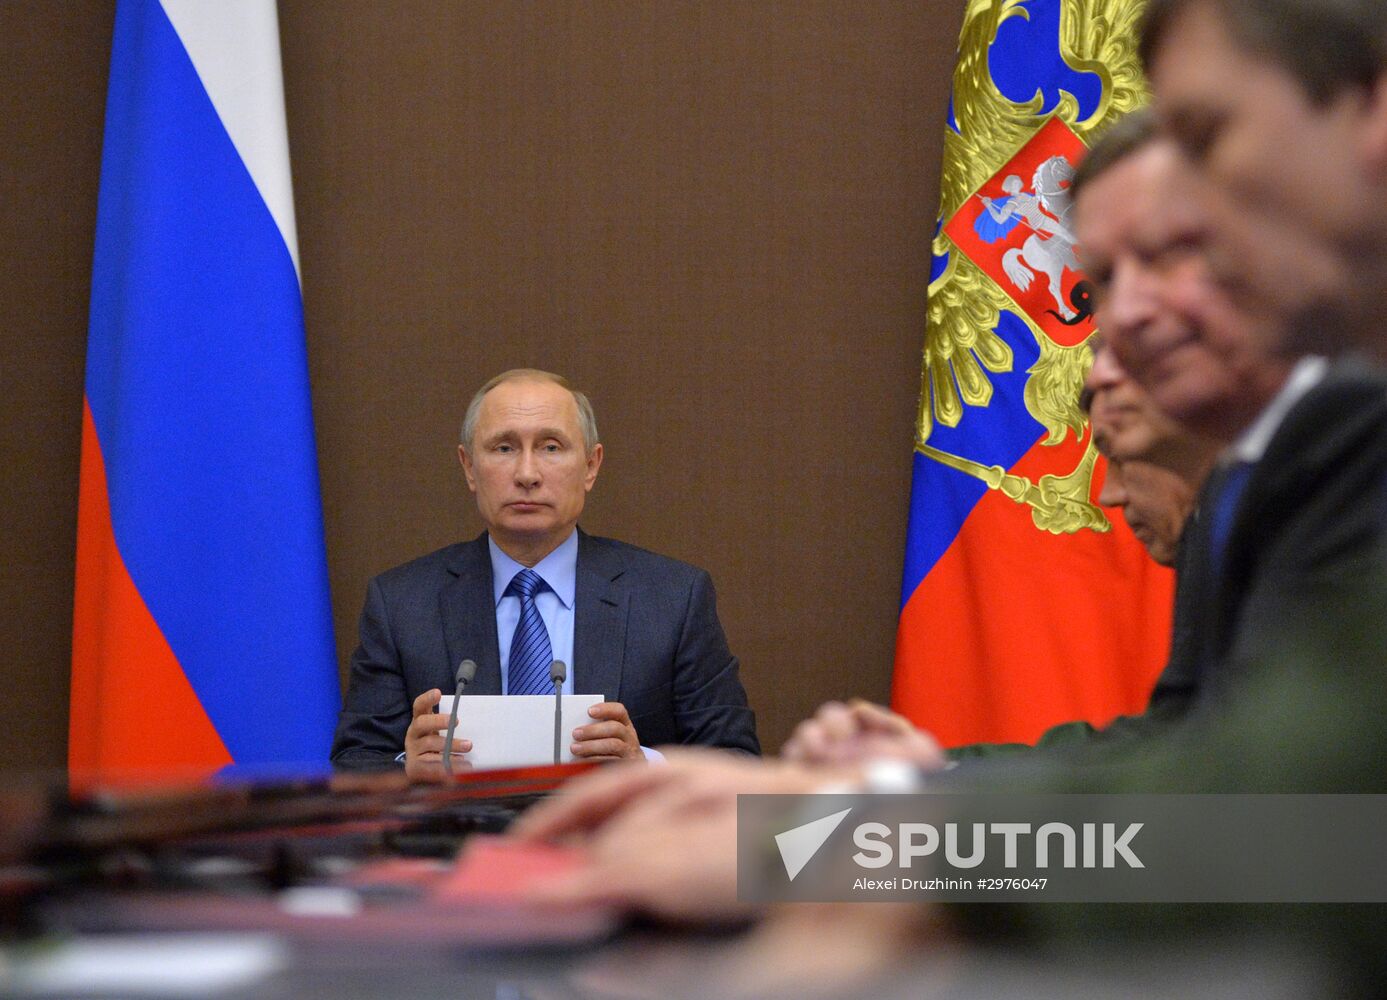 President Putin holds meeting on designing new types of weapons